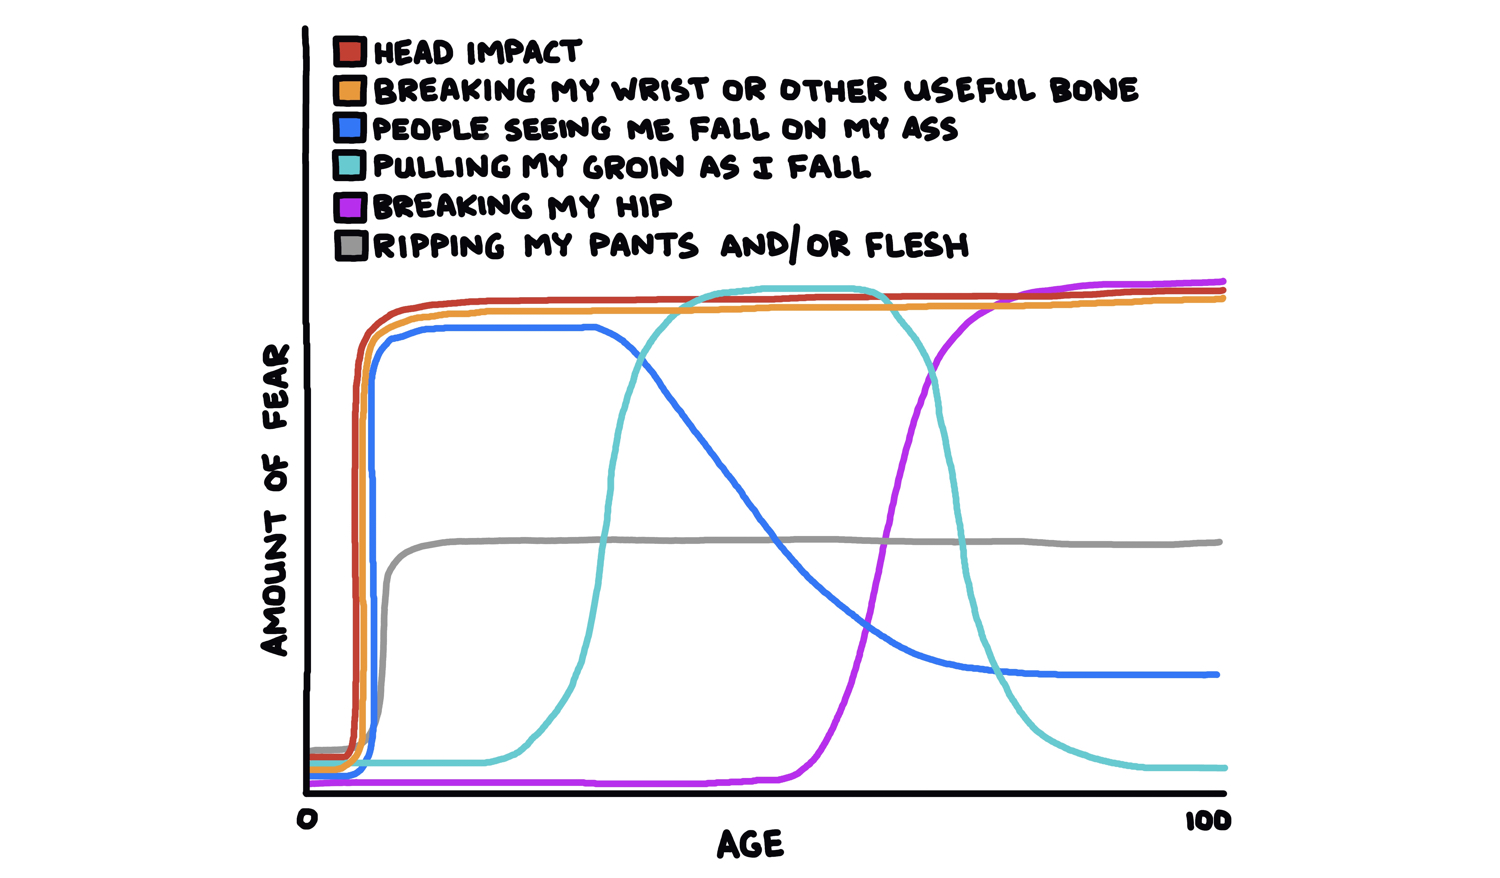 Fears Of Effects Of Falling On Ass, By Age